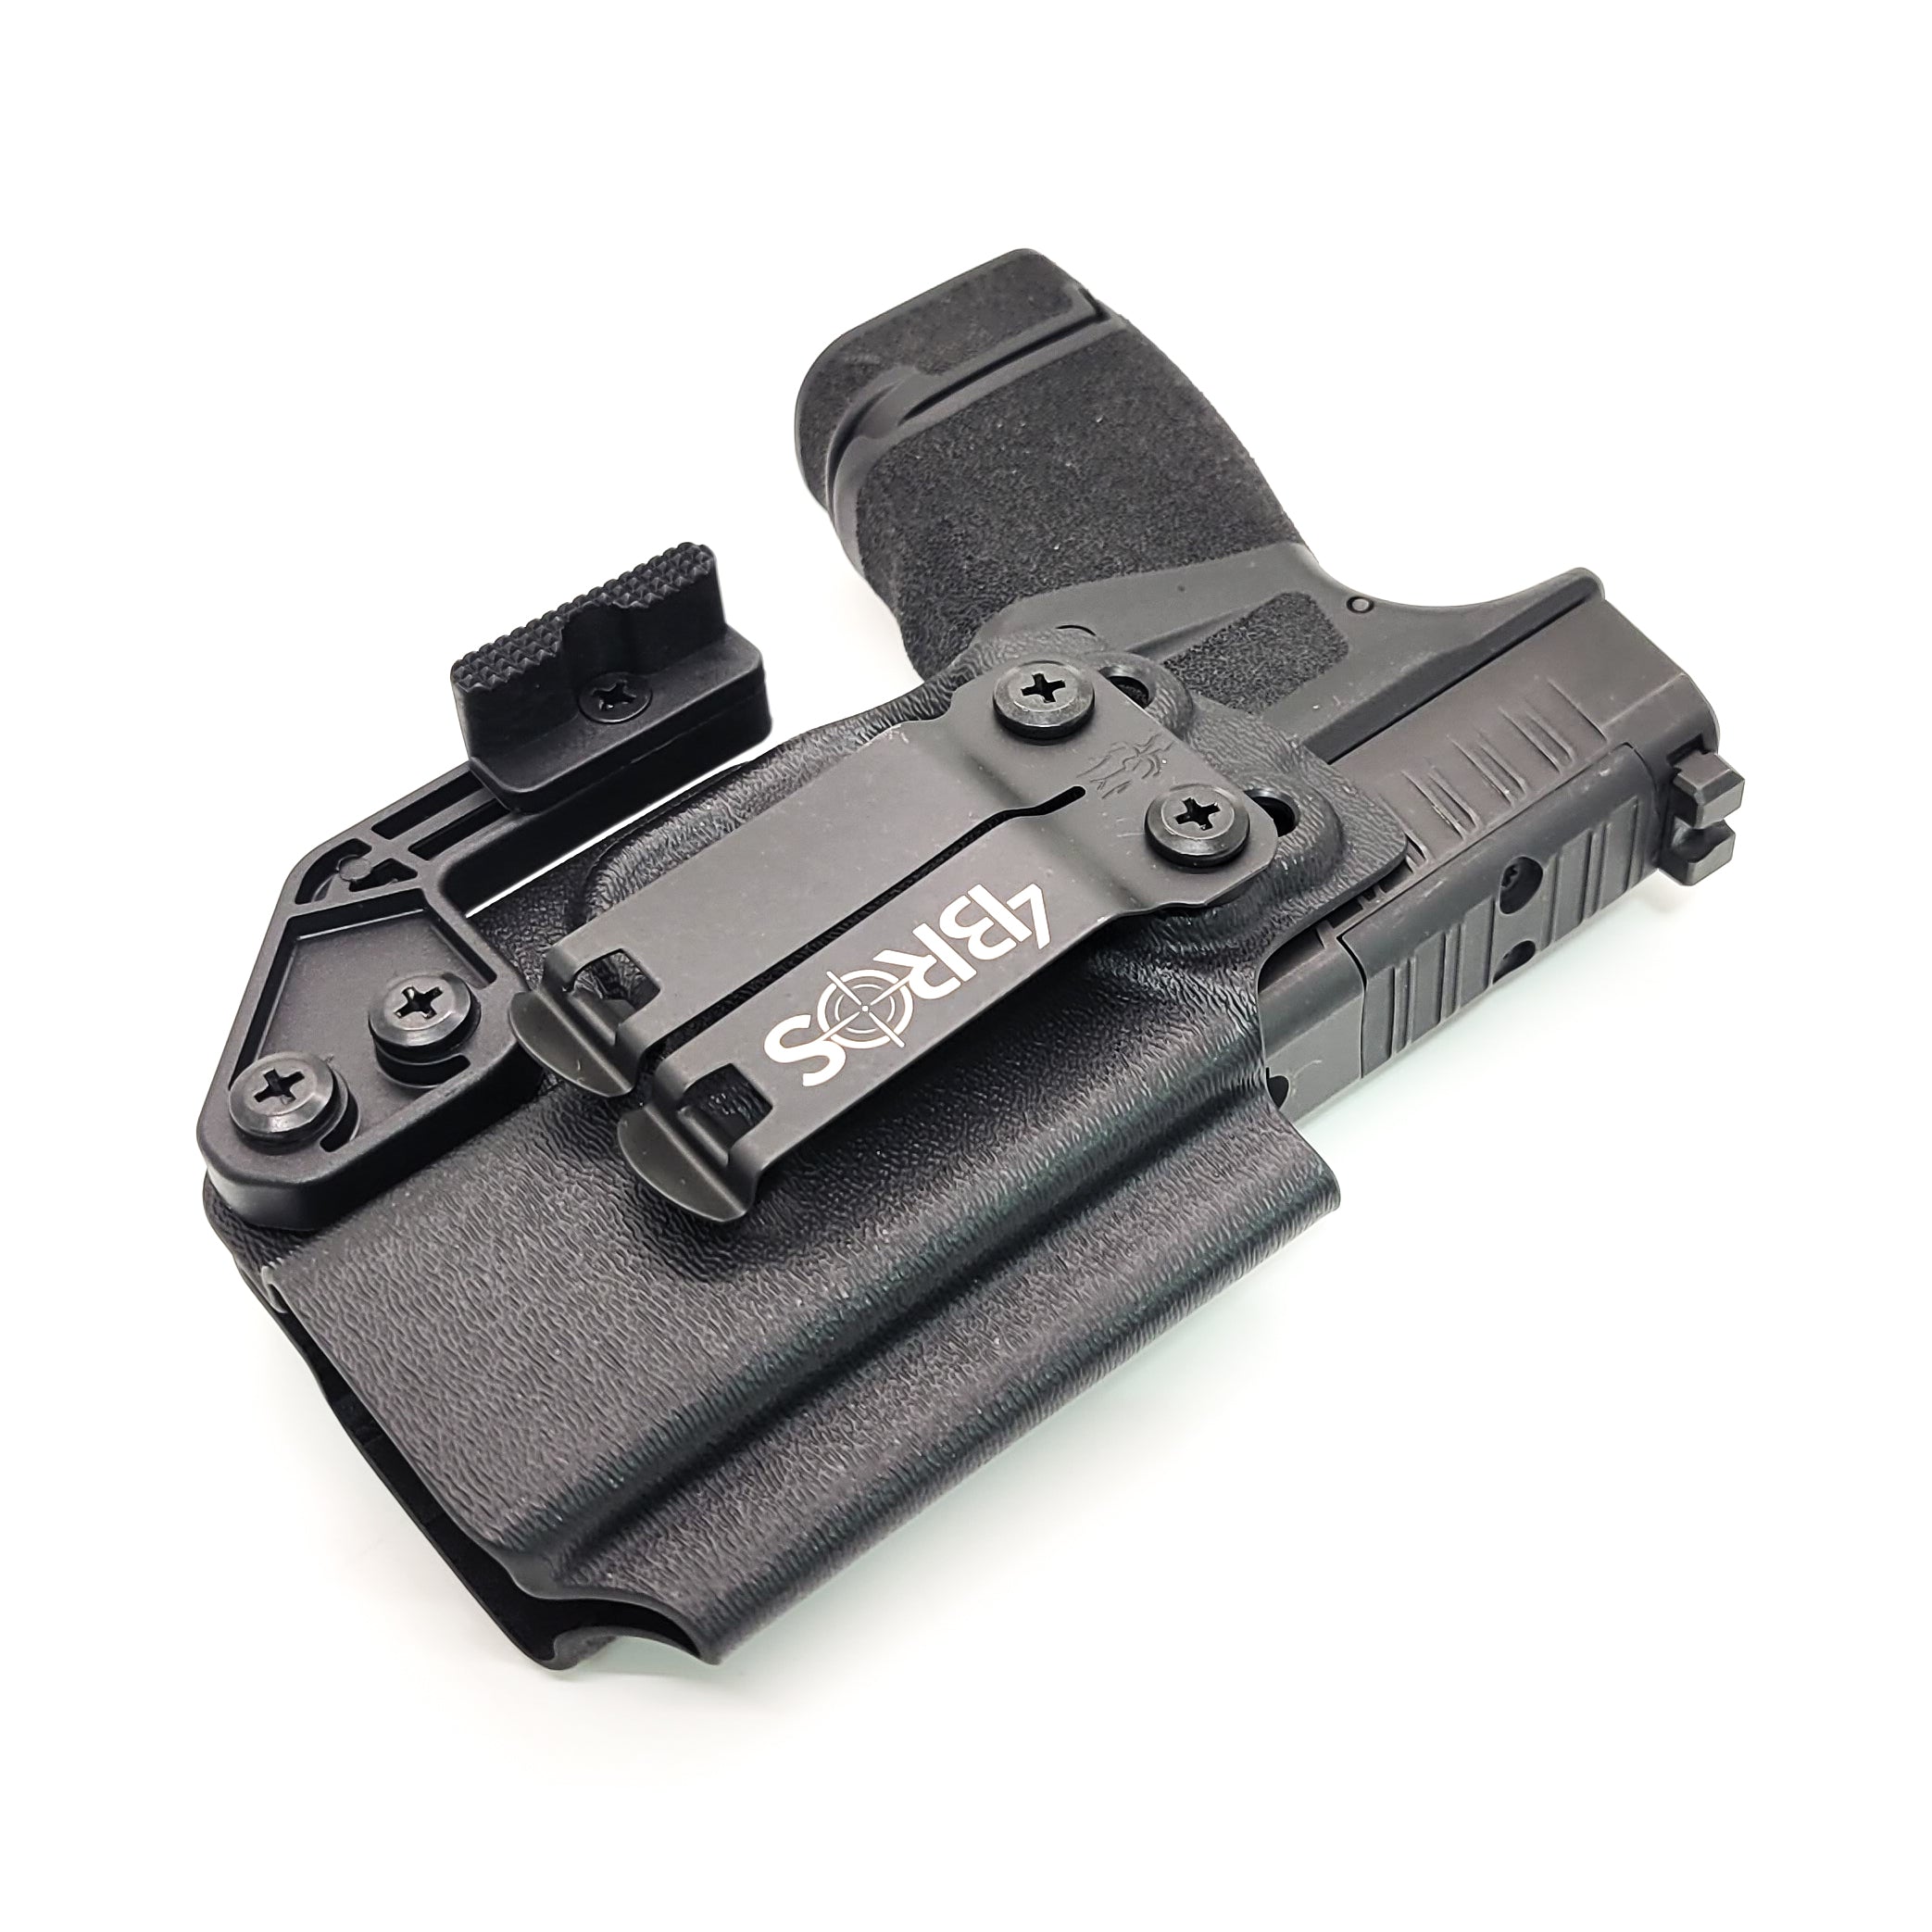 For the best, IWB AIWB Inside Waistband Holster designed to fit the Springfield Armory Hellcat, shop Four Brothers Holsters. Designed to accommodate a red dot sight mounted to the pistol. Full sweat guard, adjustable retention, minimal material, and smooth edges to reduce printing. Proudly made in the USA. 